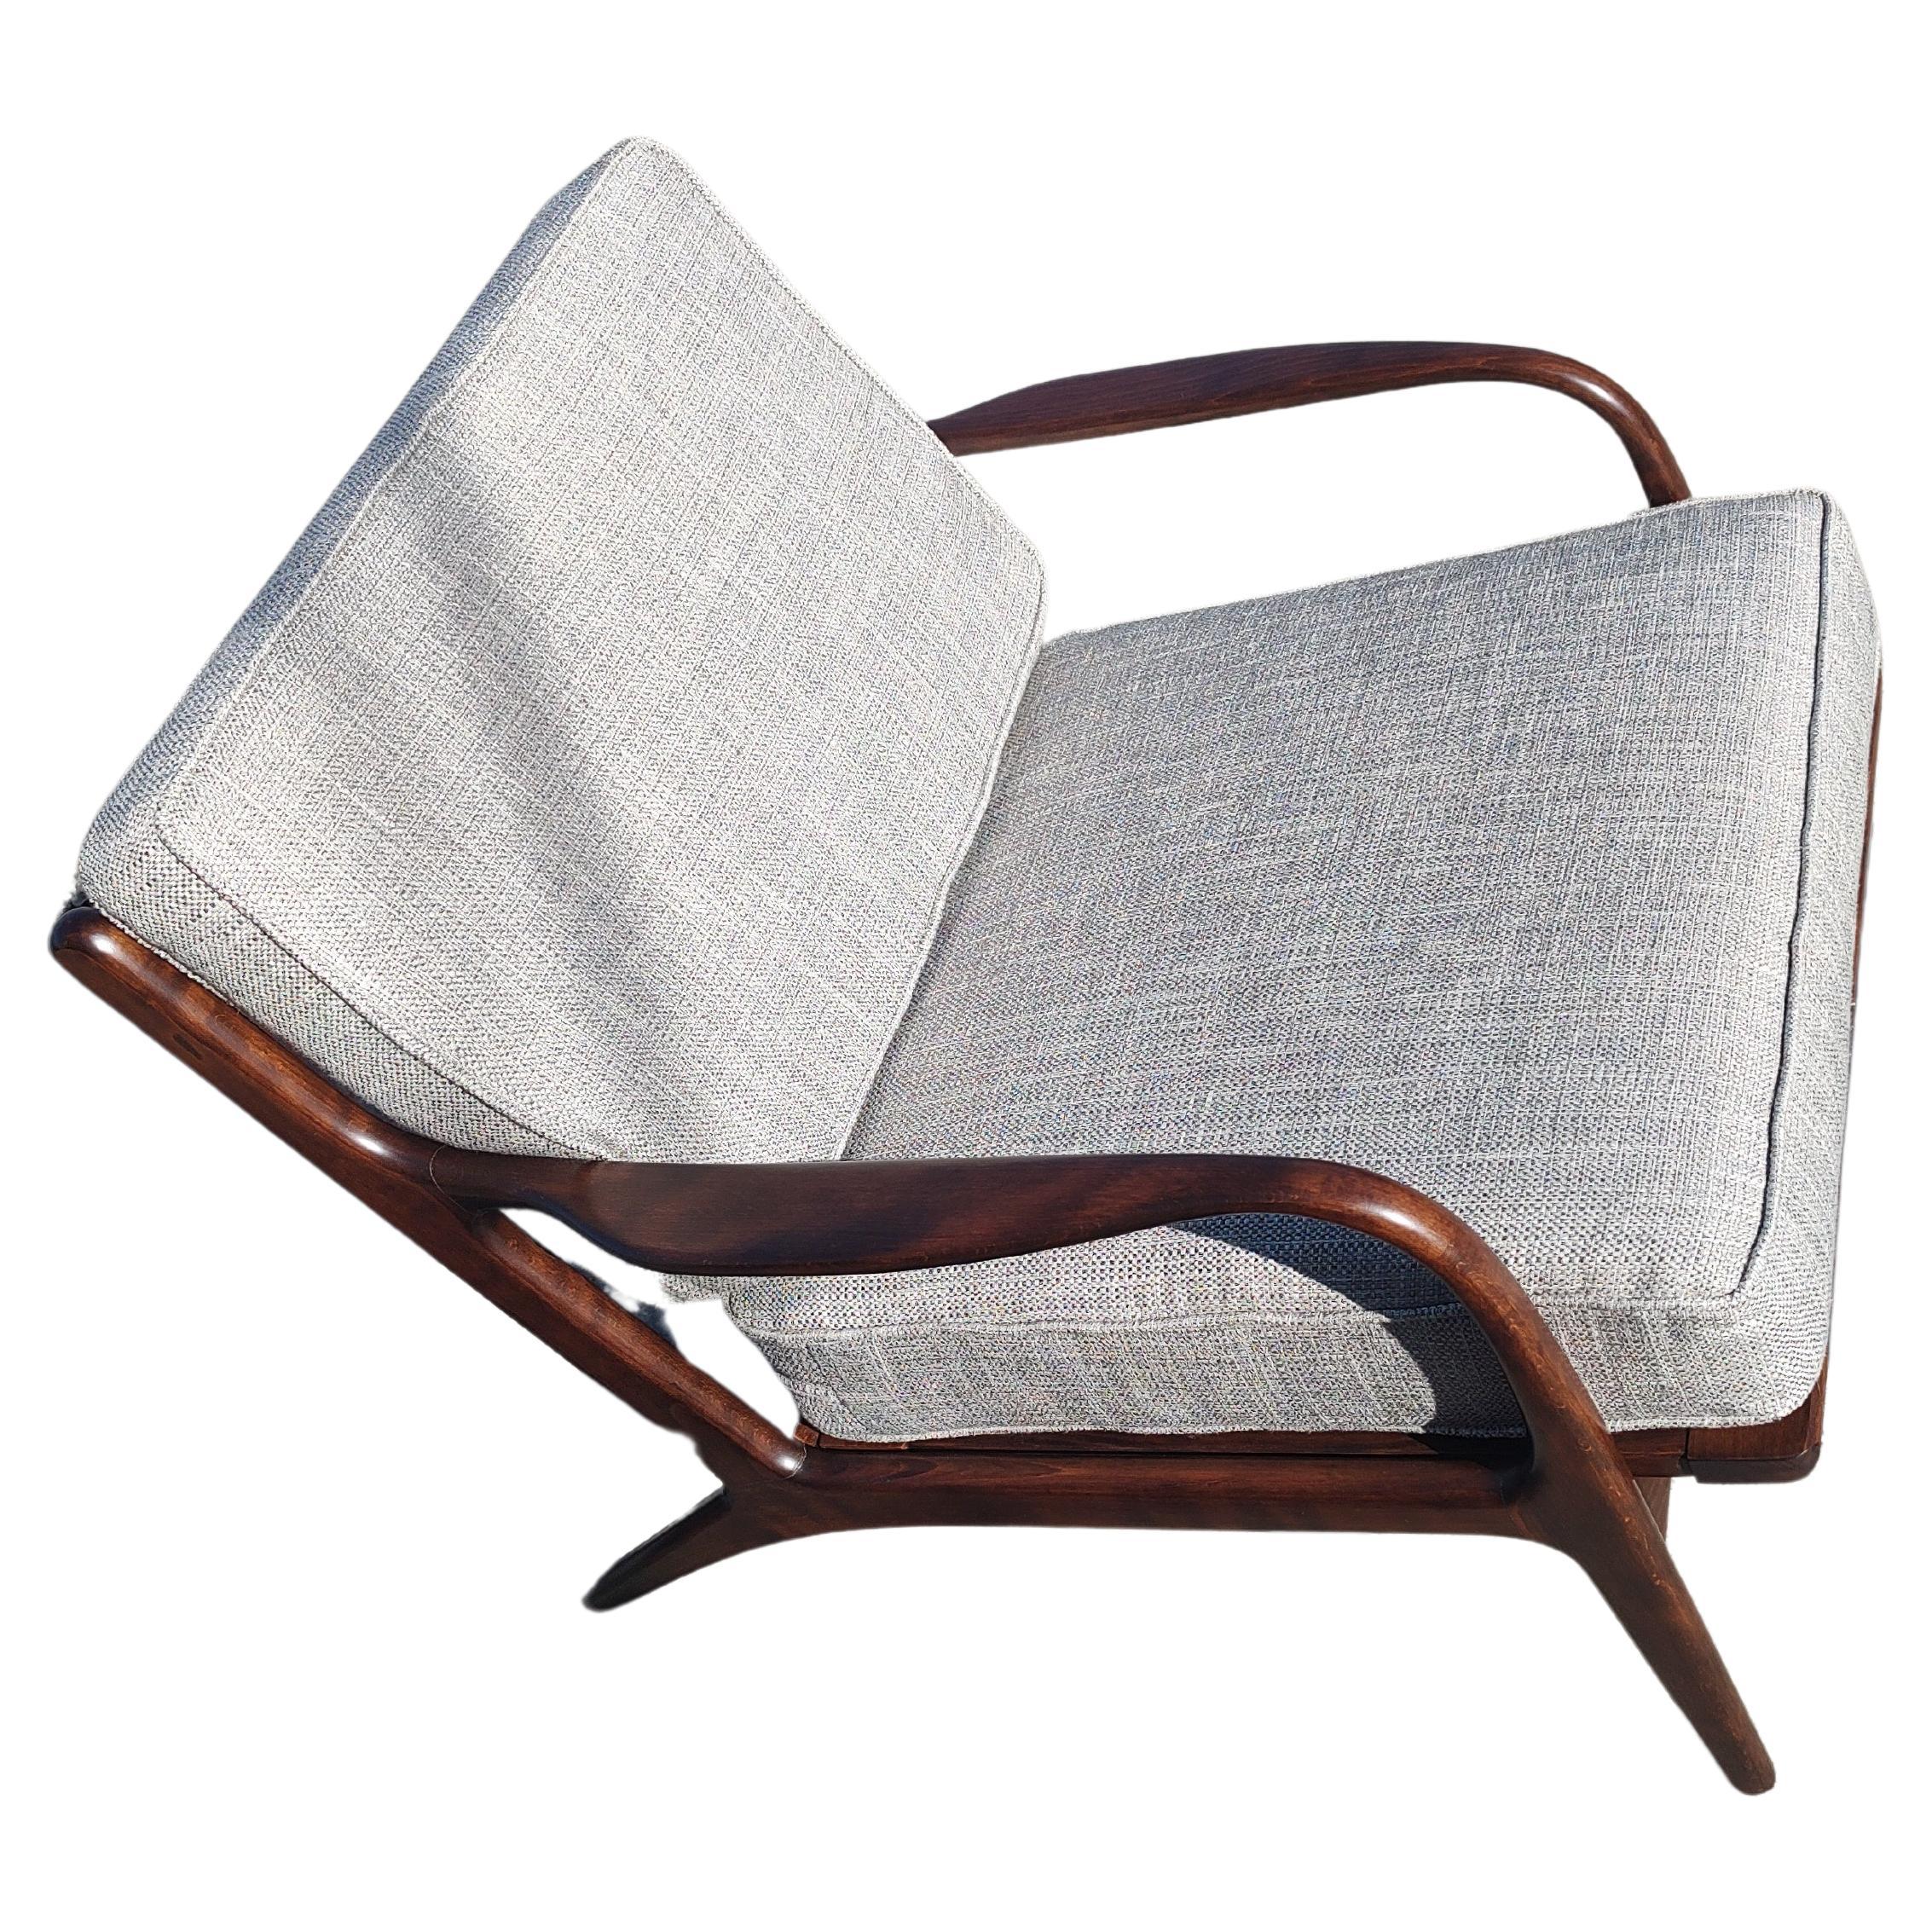 Totally restored Mid century lounge chair with adjustable ottoman foot rest attributed to Ib Kofod-Larsen. All new fabric with new foam on both pieces. Vintage retro looking fabric is a beautiful silvery grey in color. Ottoman is 19.5 x 21 x 15.5h